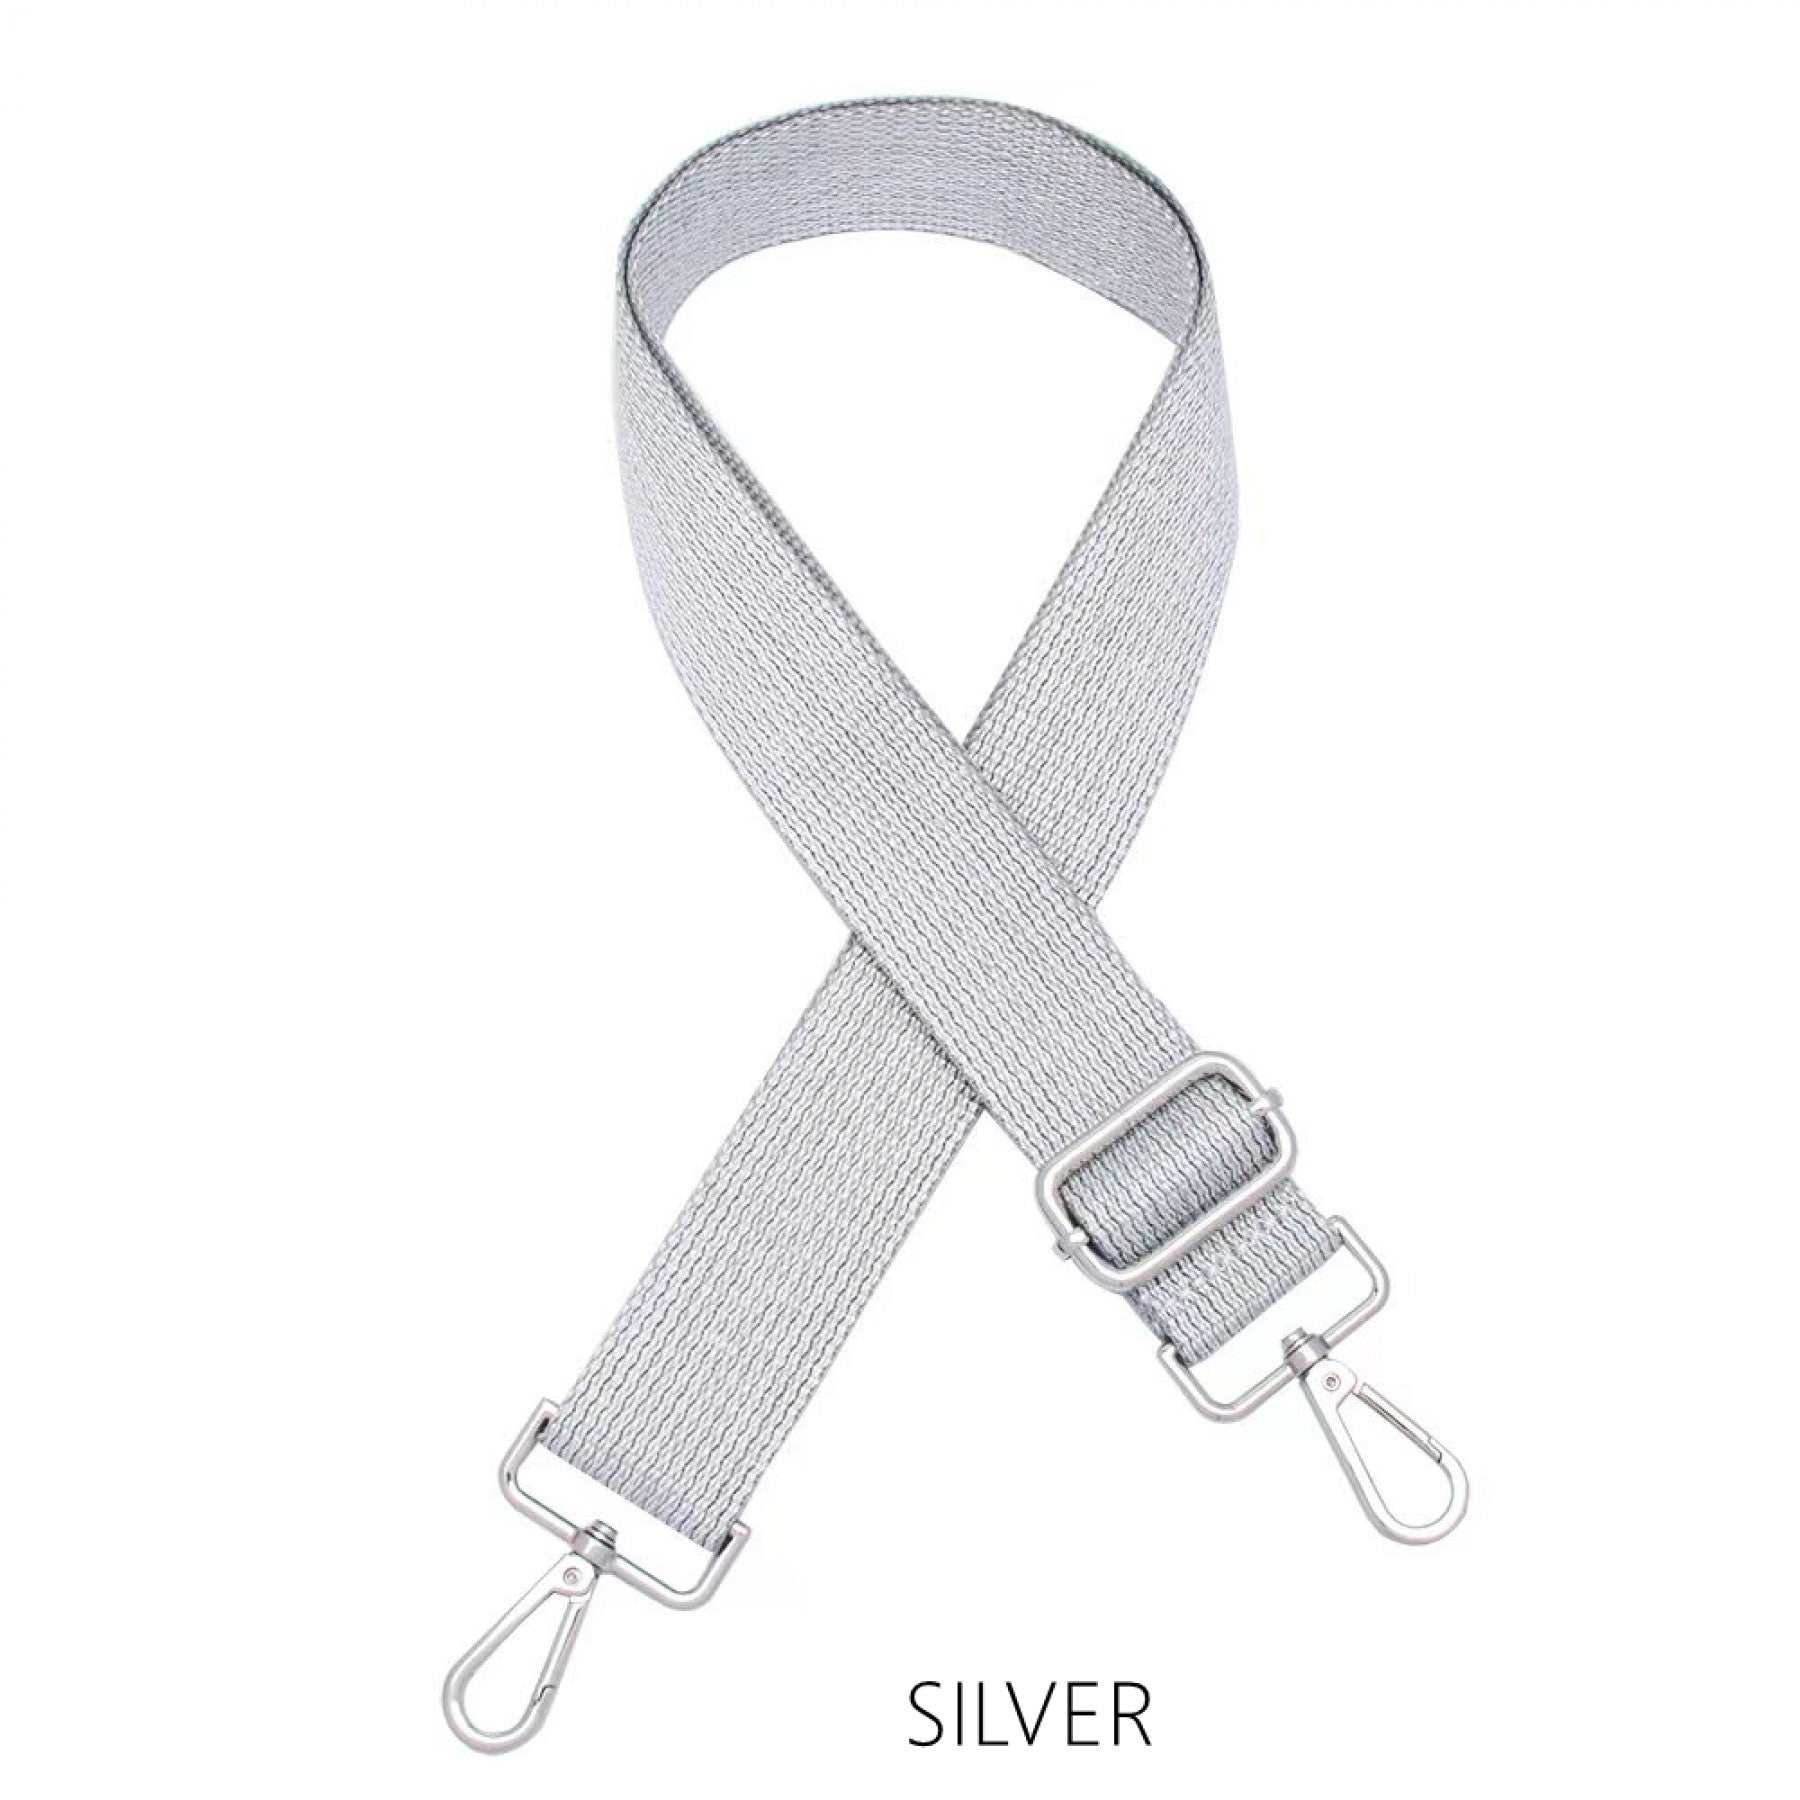 lusciousscarves Apparel & Accessories Slim Interchangeable Handbag Straps with Silver Hardware